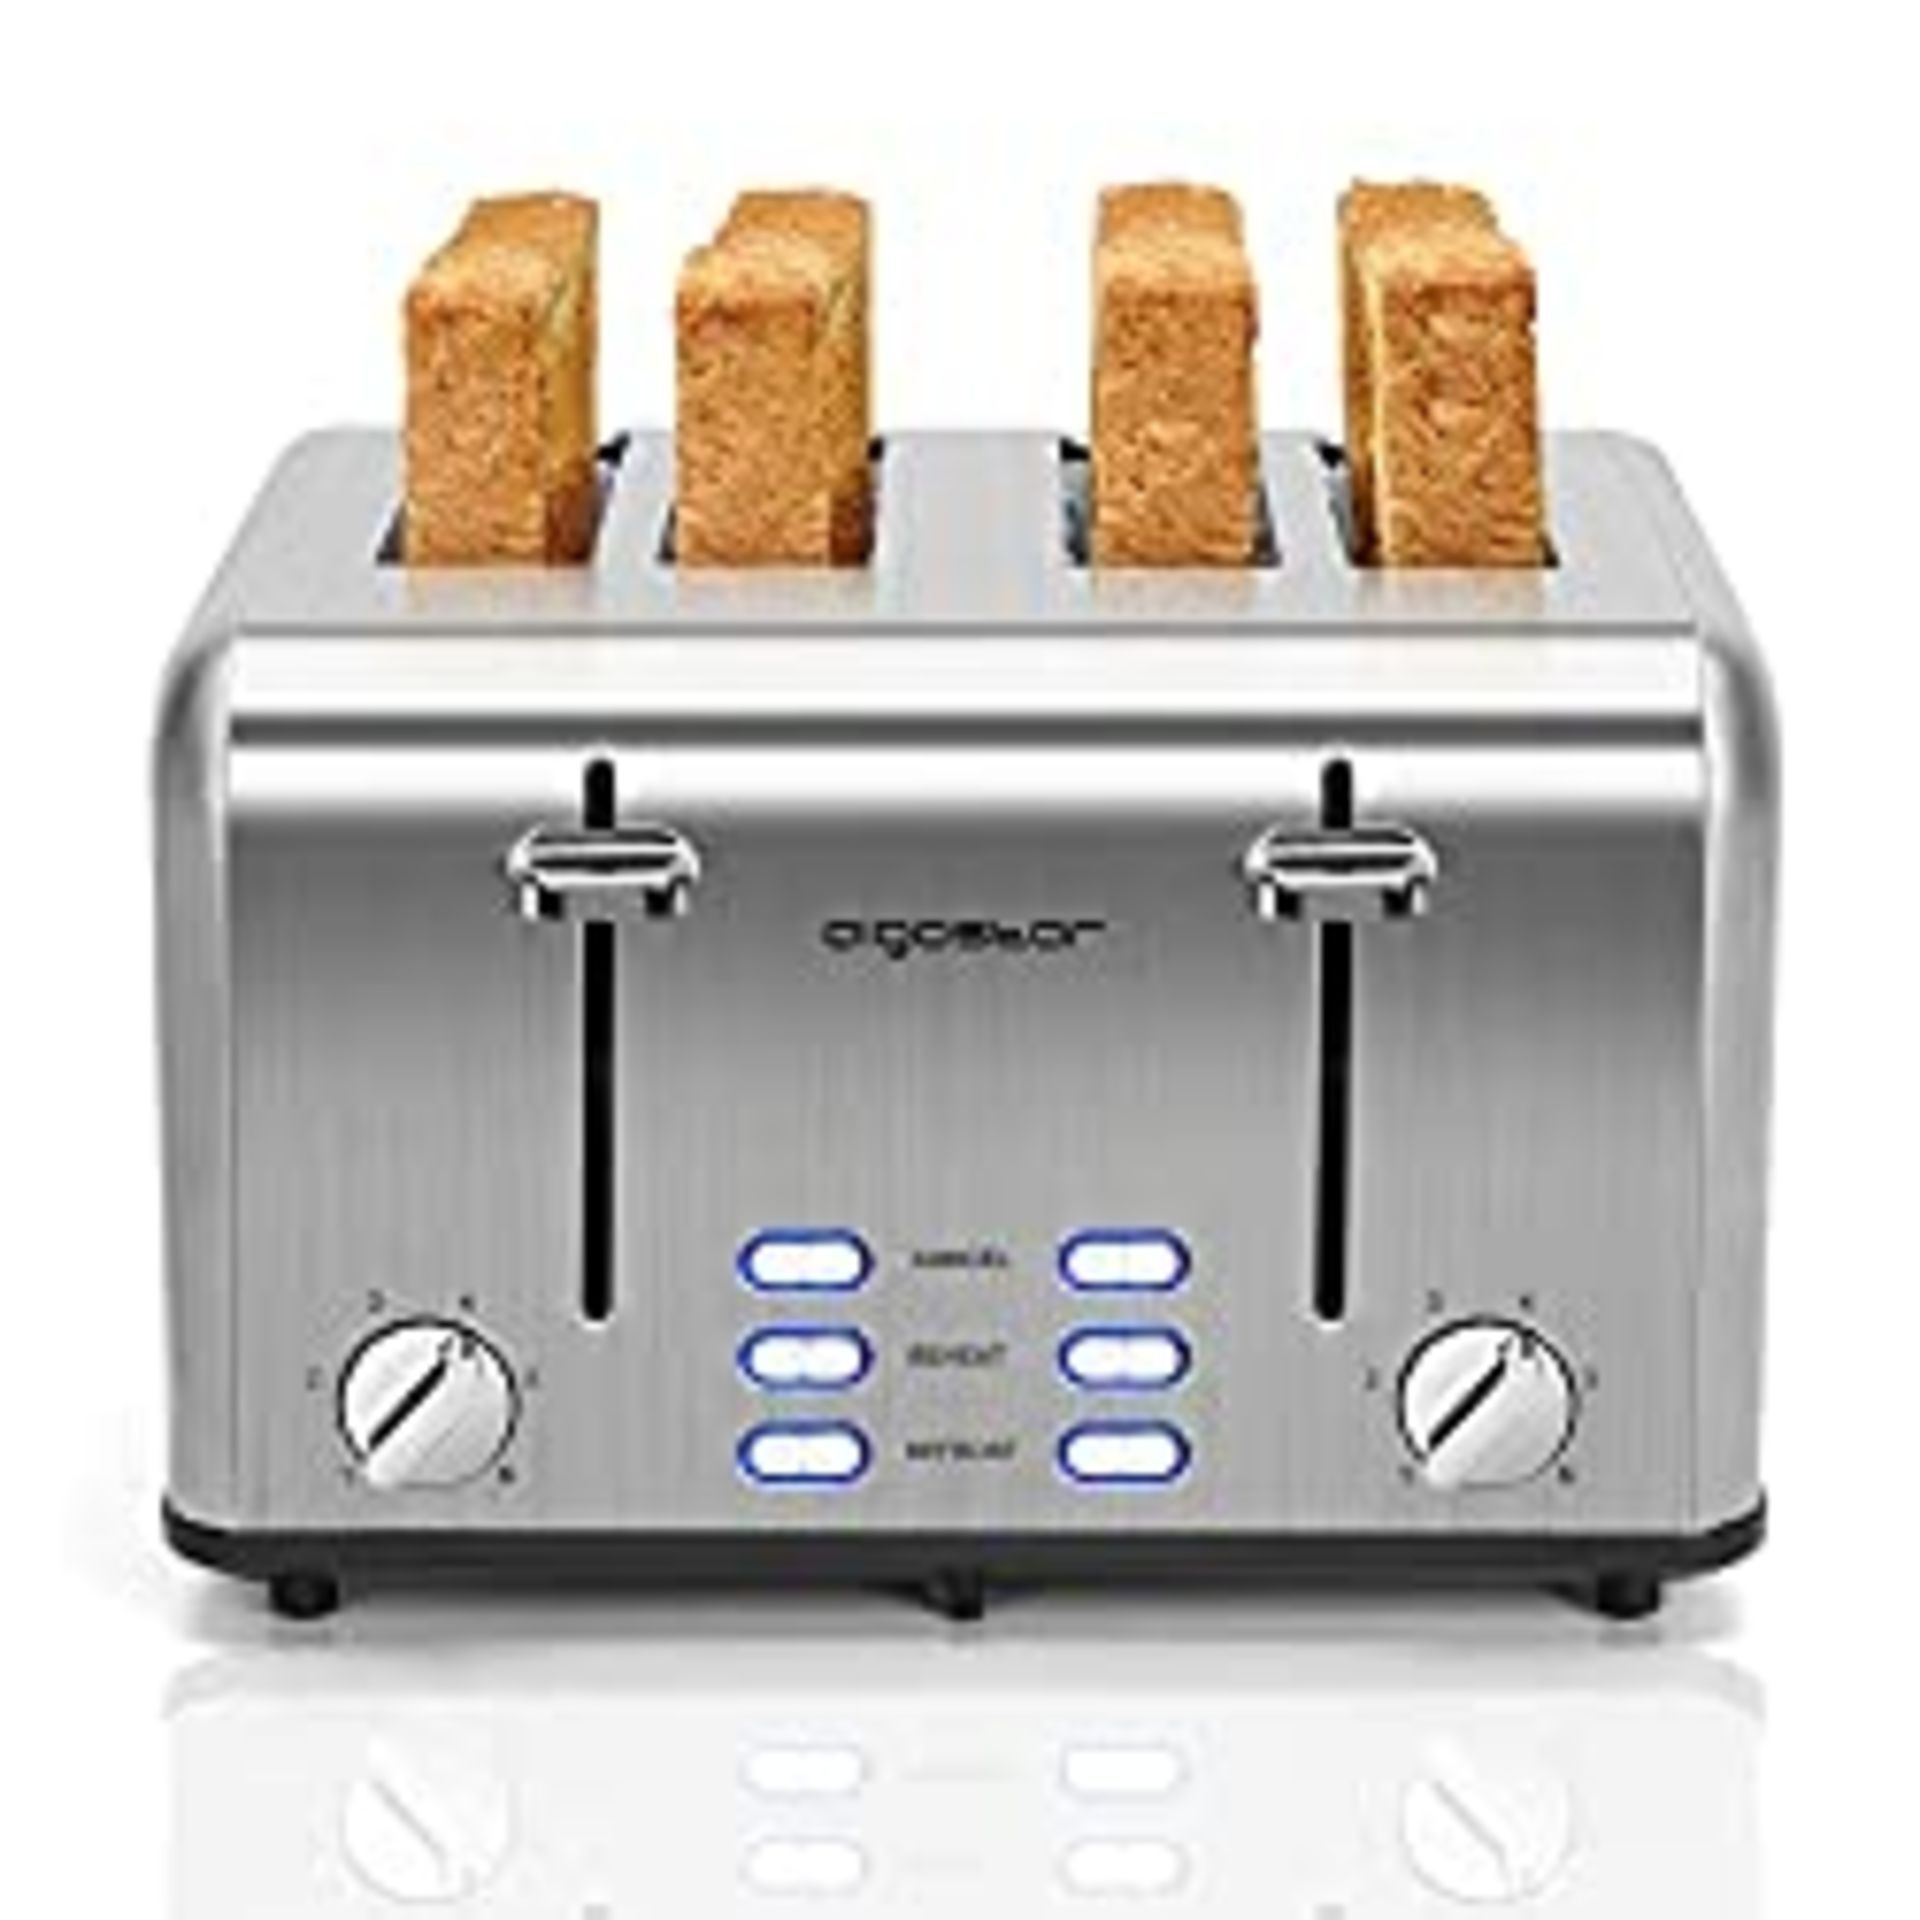 RRP £47.94 Aigostar Toaster 4 Slice Stainless Steel Toaster with